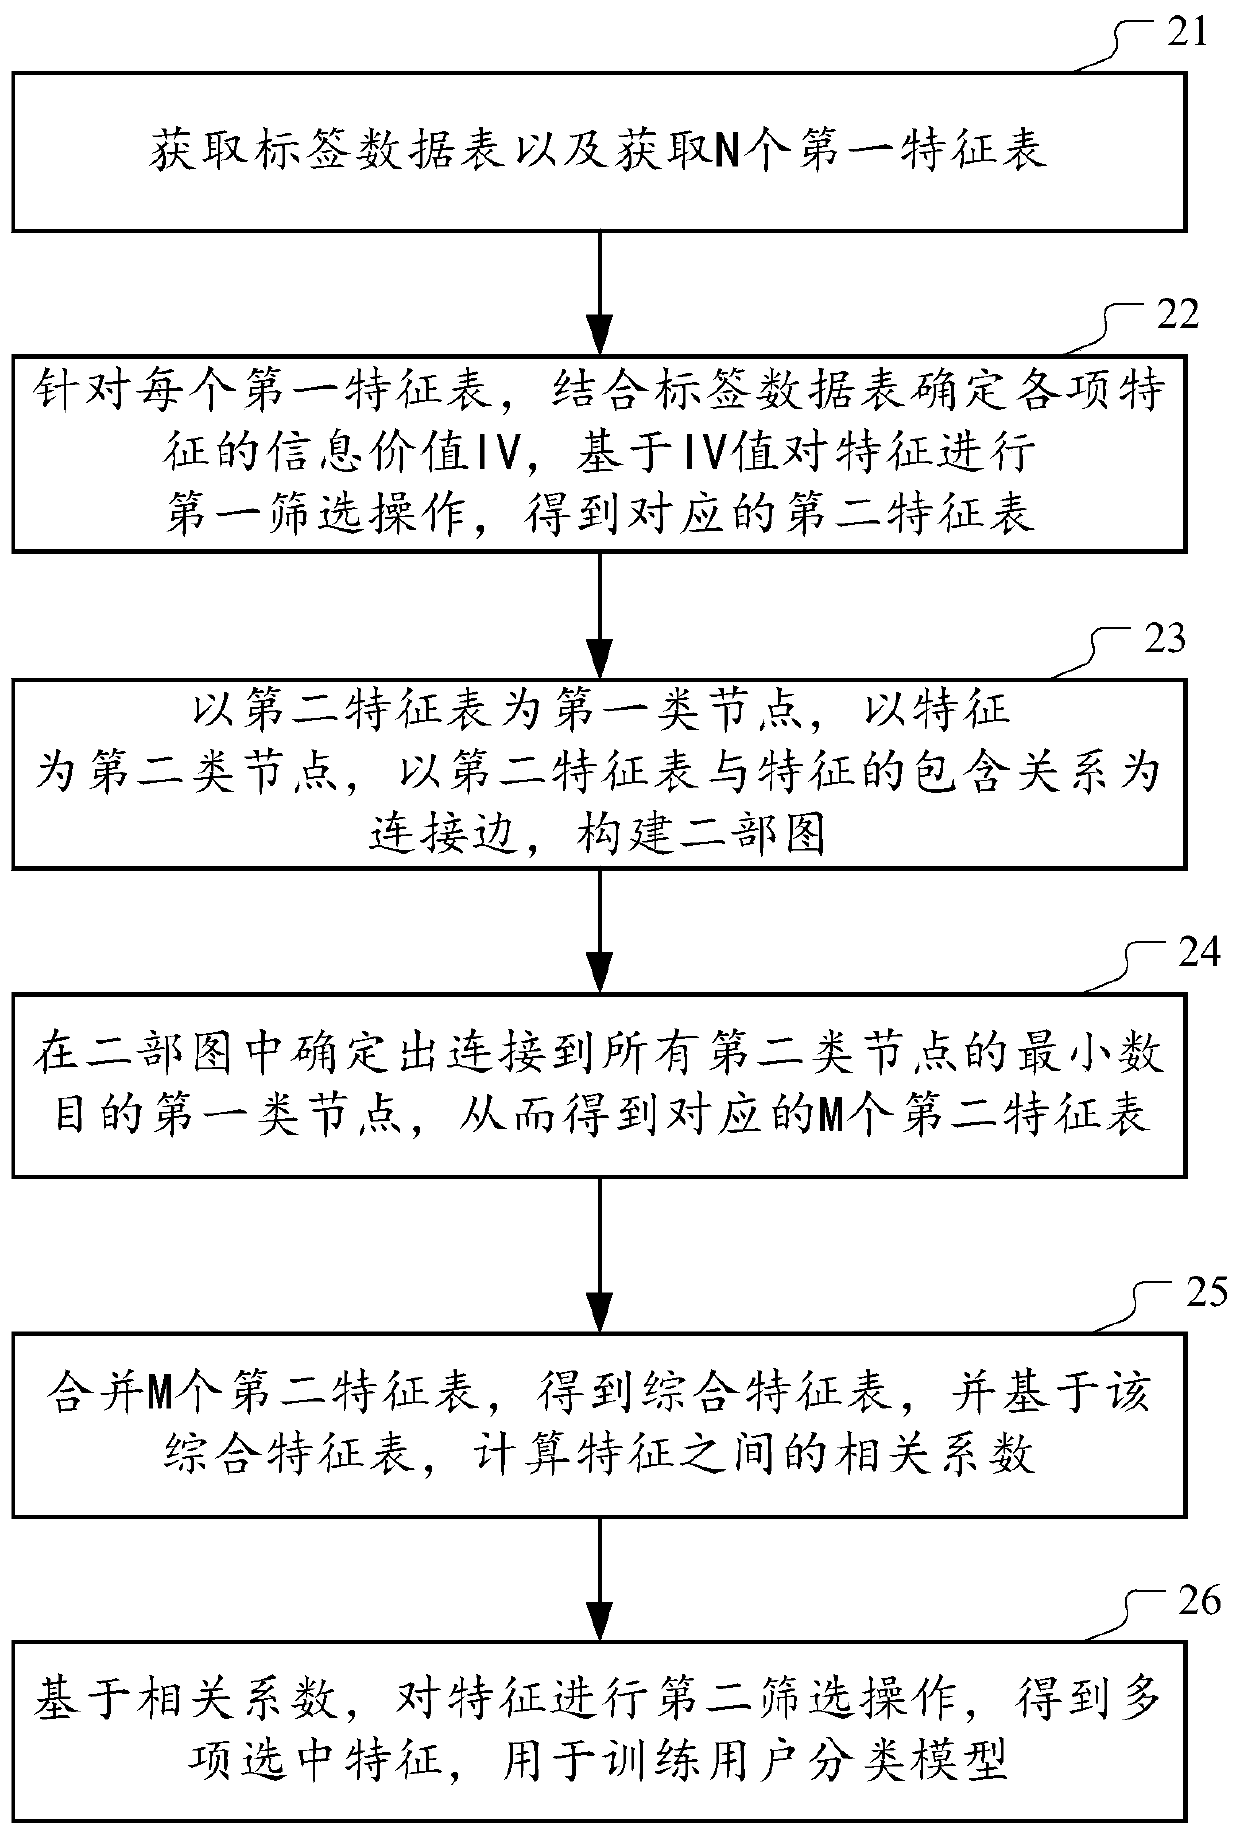 Feature processing method and device for user classification model